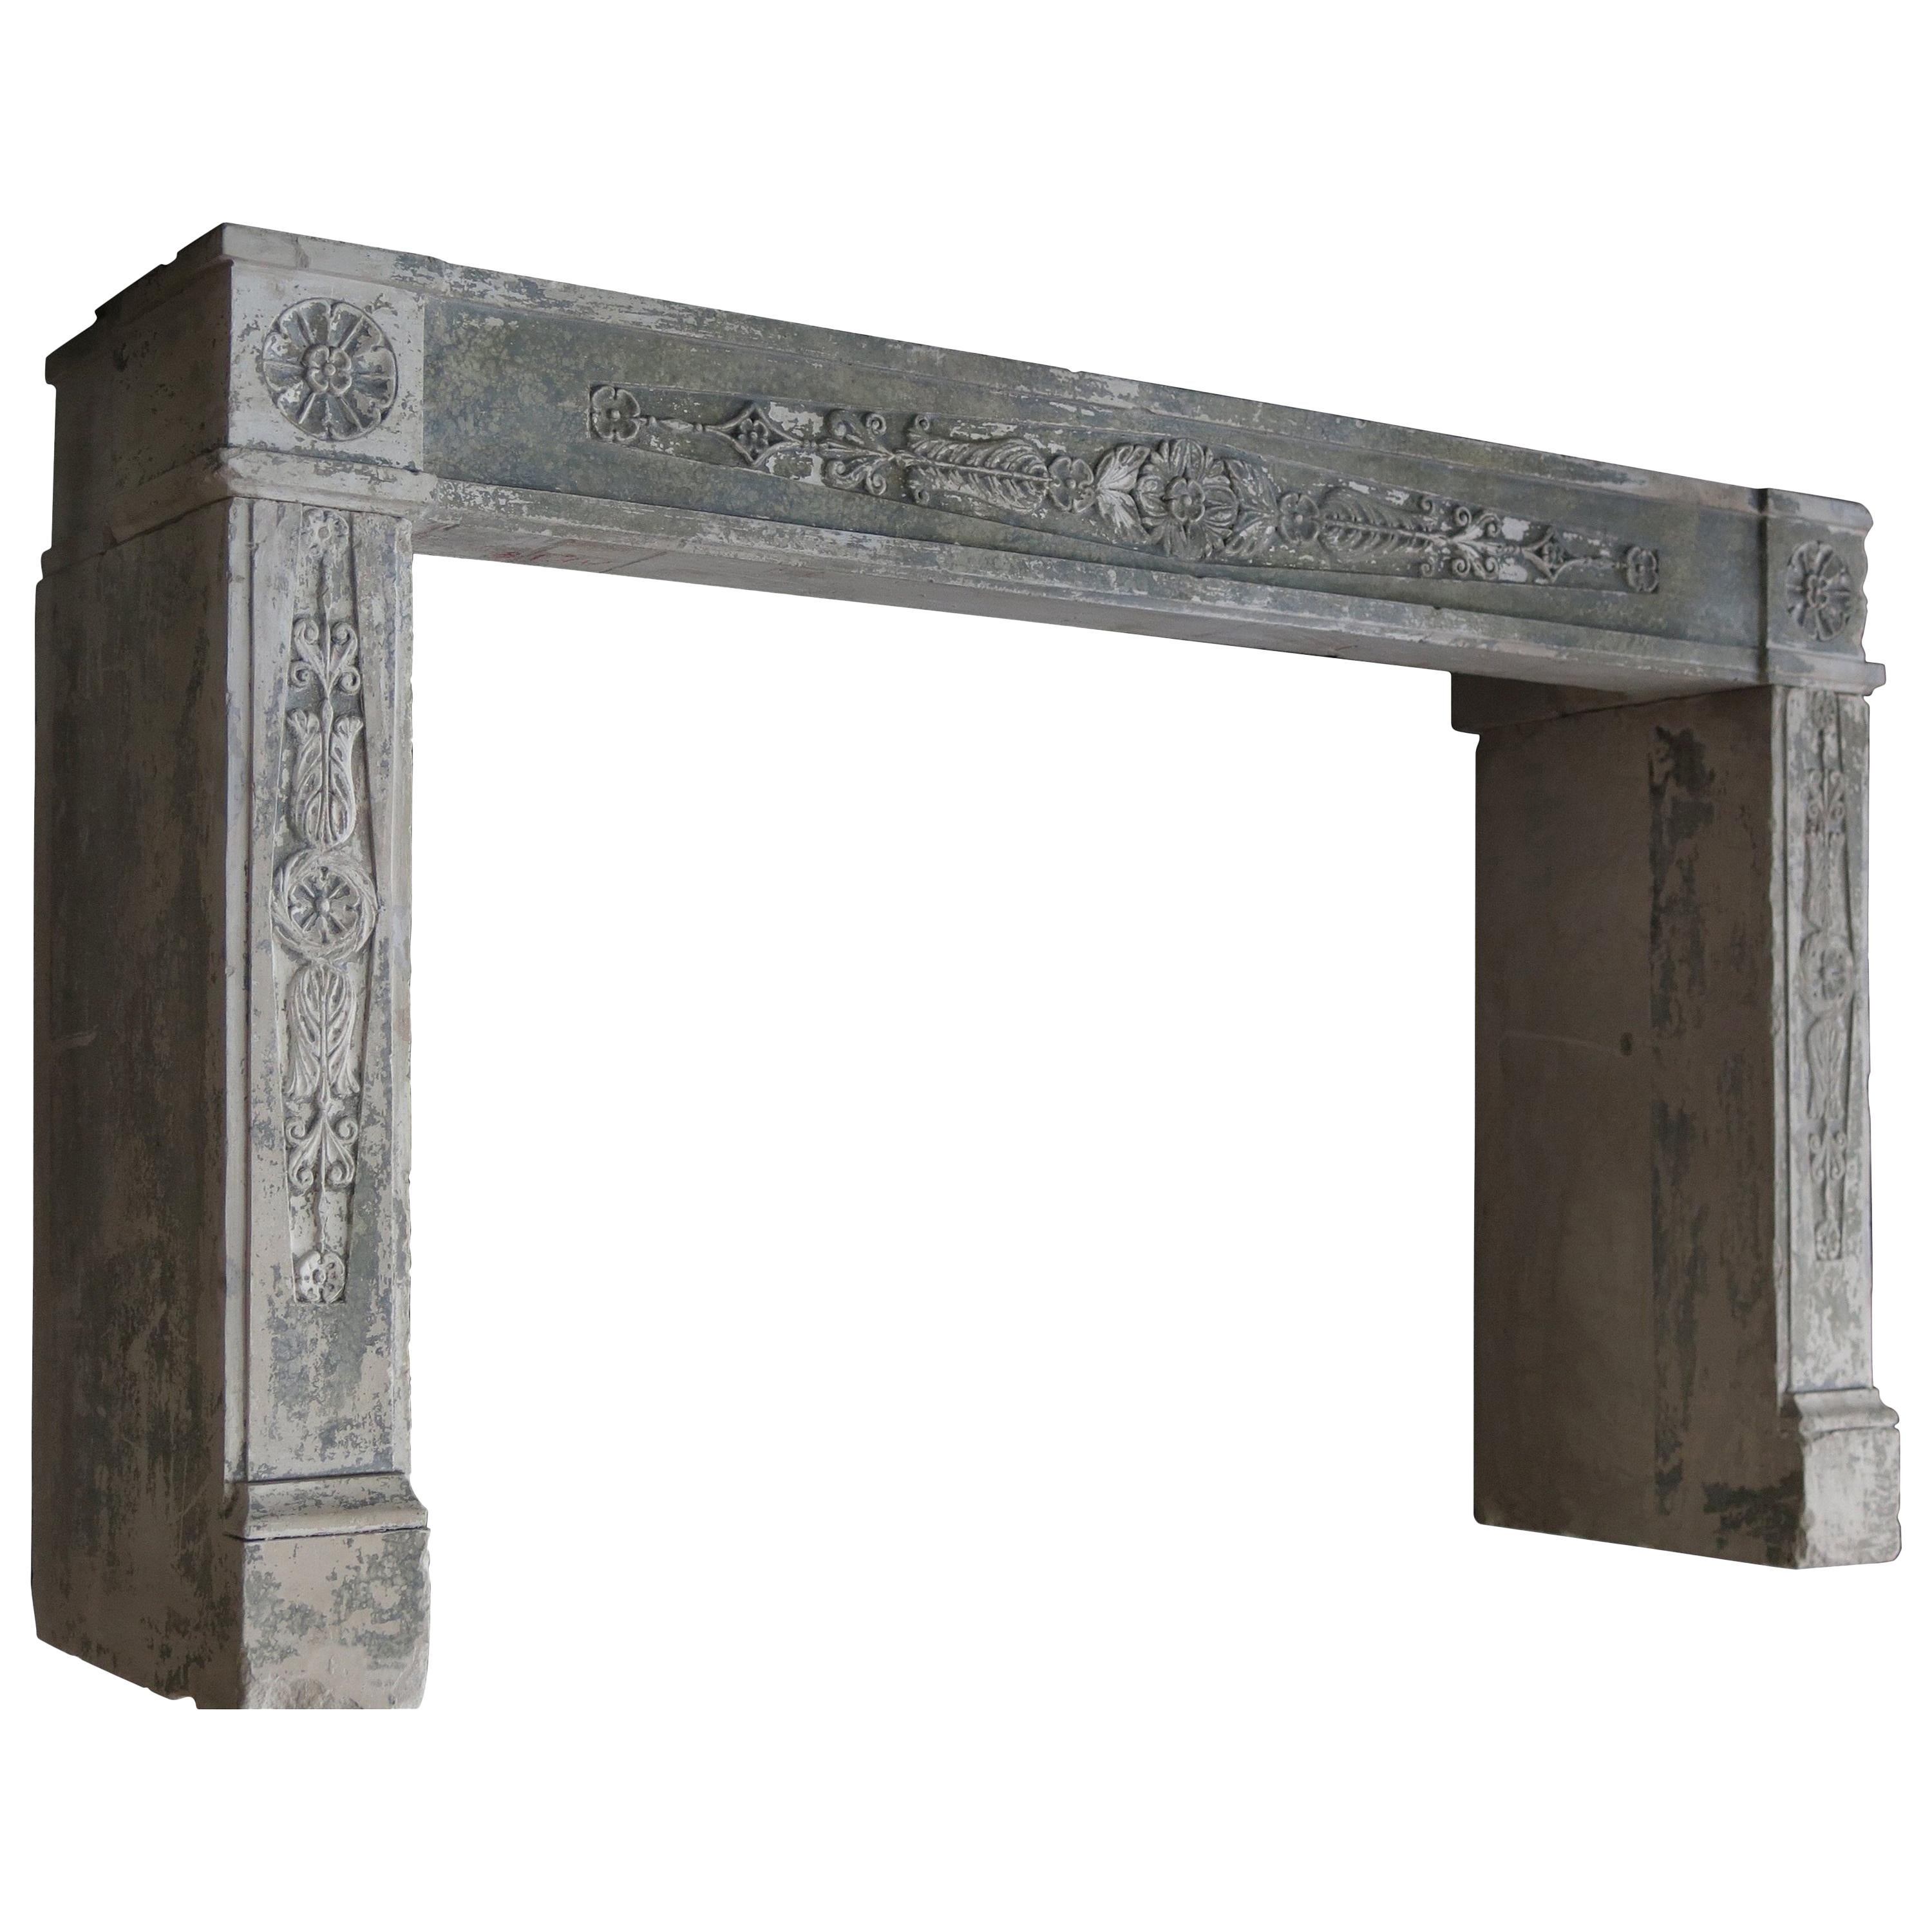 Normandy French Limestone Fireplace, Louis XVI Period, 18th Century, France im Angebot